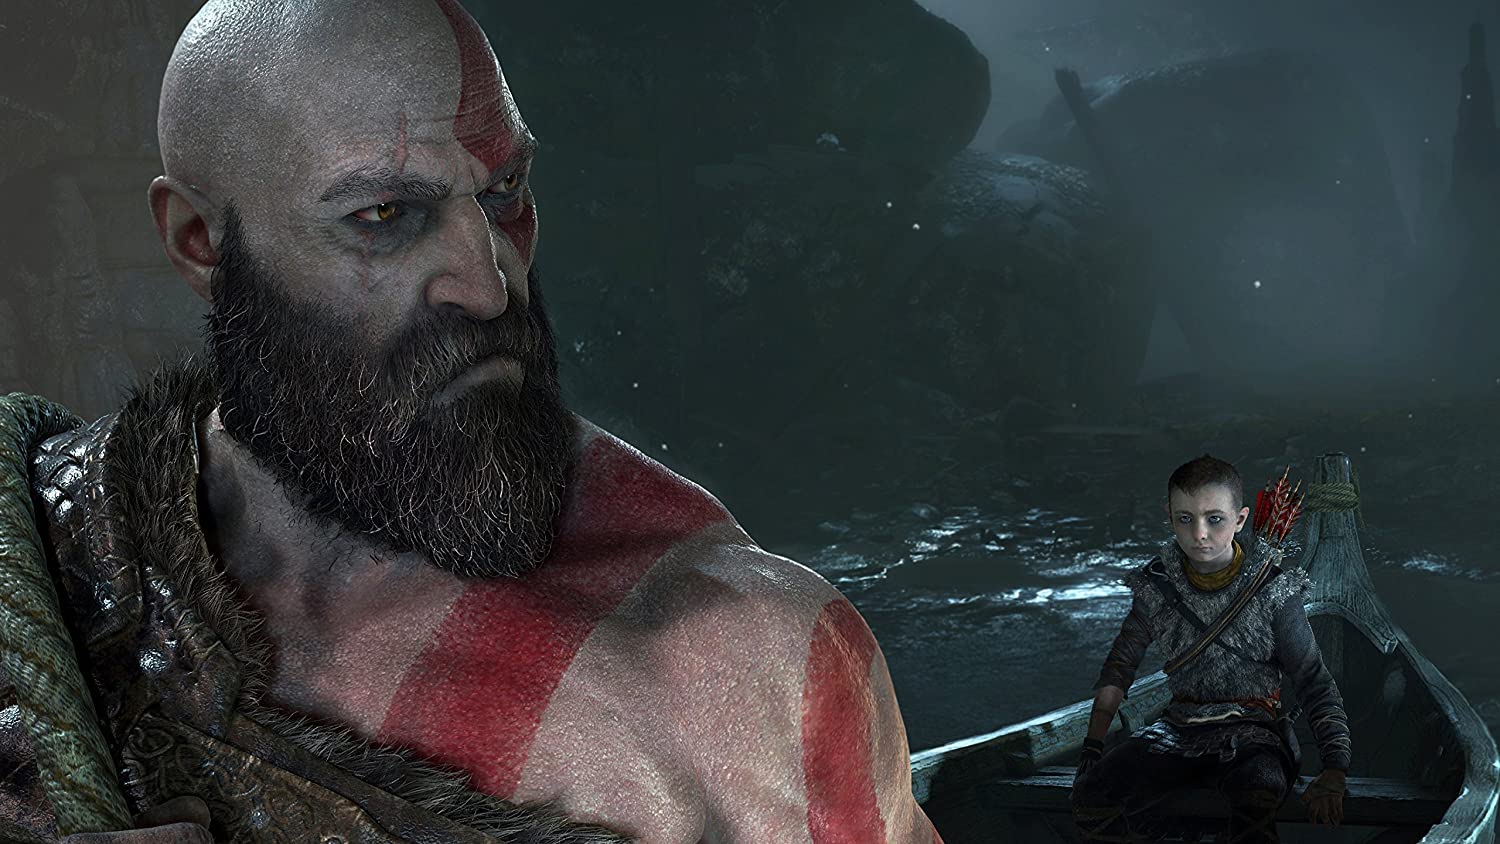 God of War PC gameplay: check out ten minutes of 4K/60FPS footage